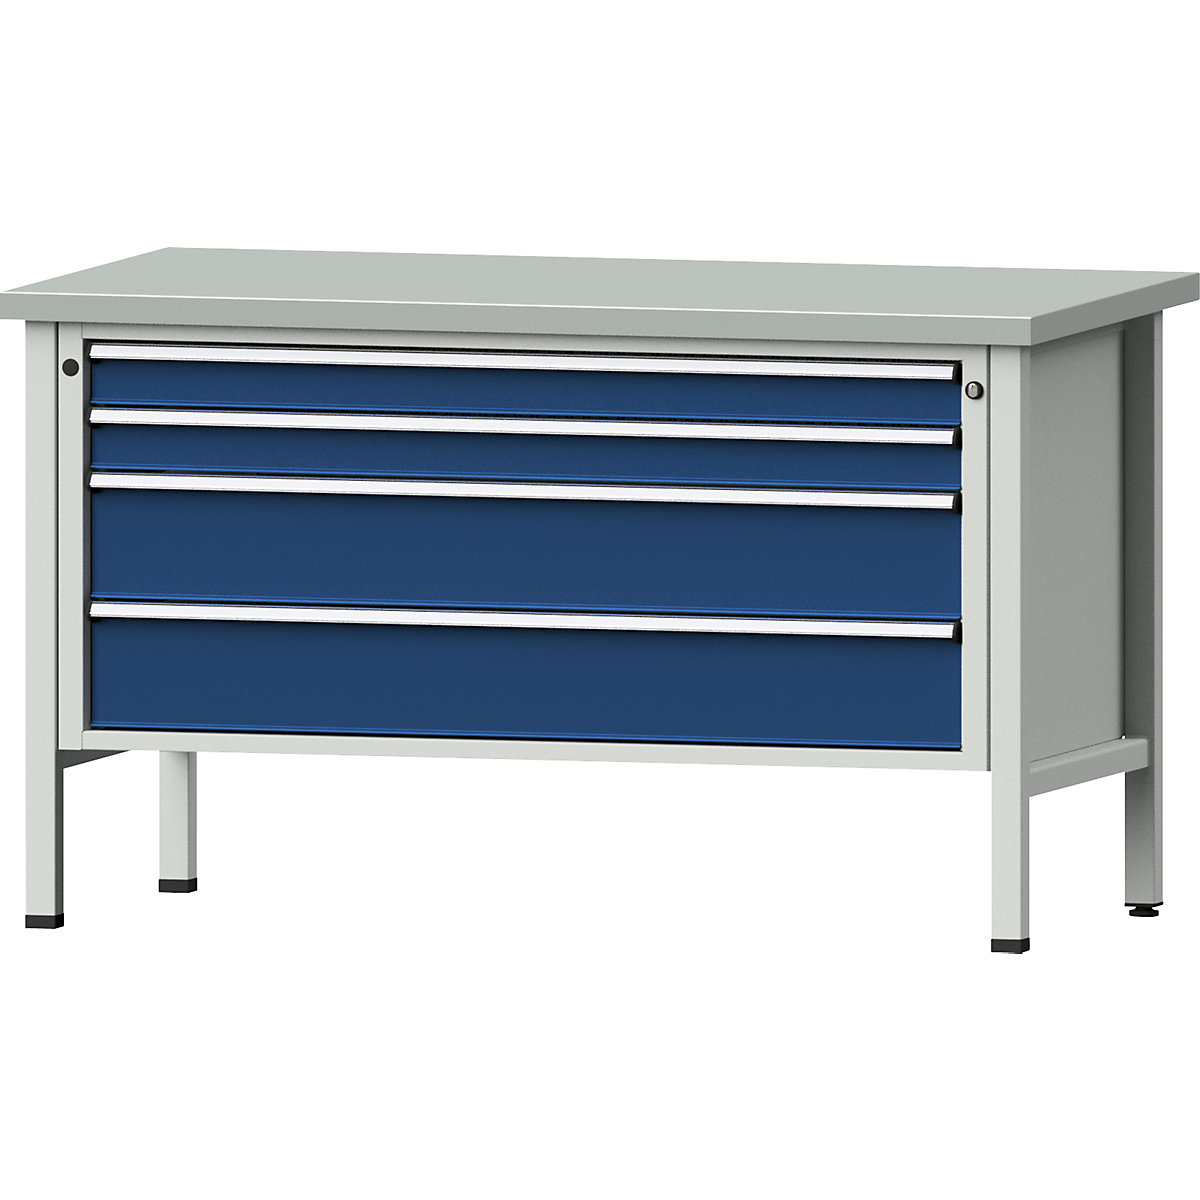 Workbench 1500 mm wide, frame construction – ANKE, 4 drawers: 2 x 90, 2 x 180 mm, sheet steel covered worktop, height 890 mm-8